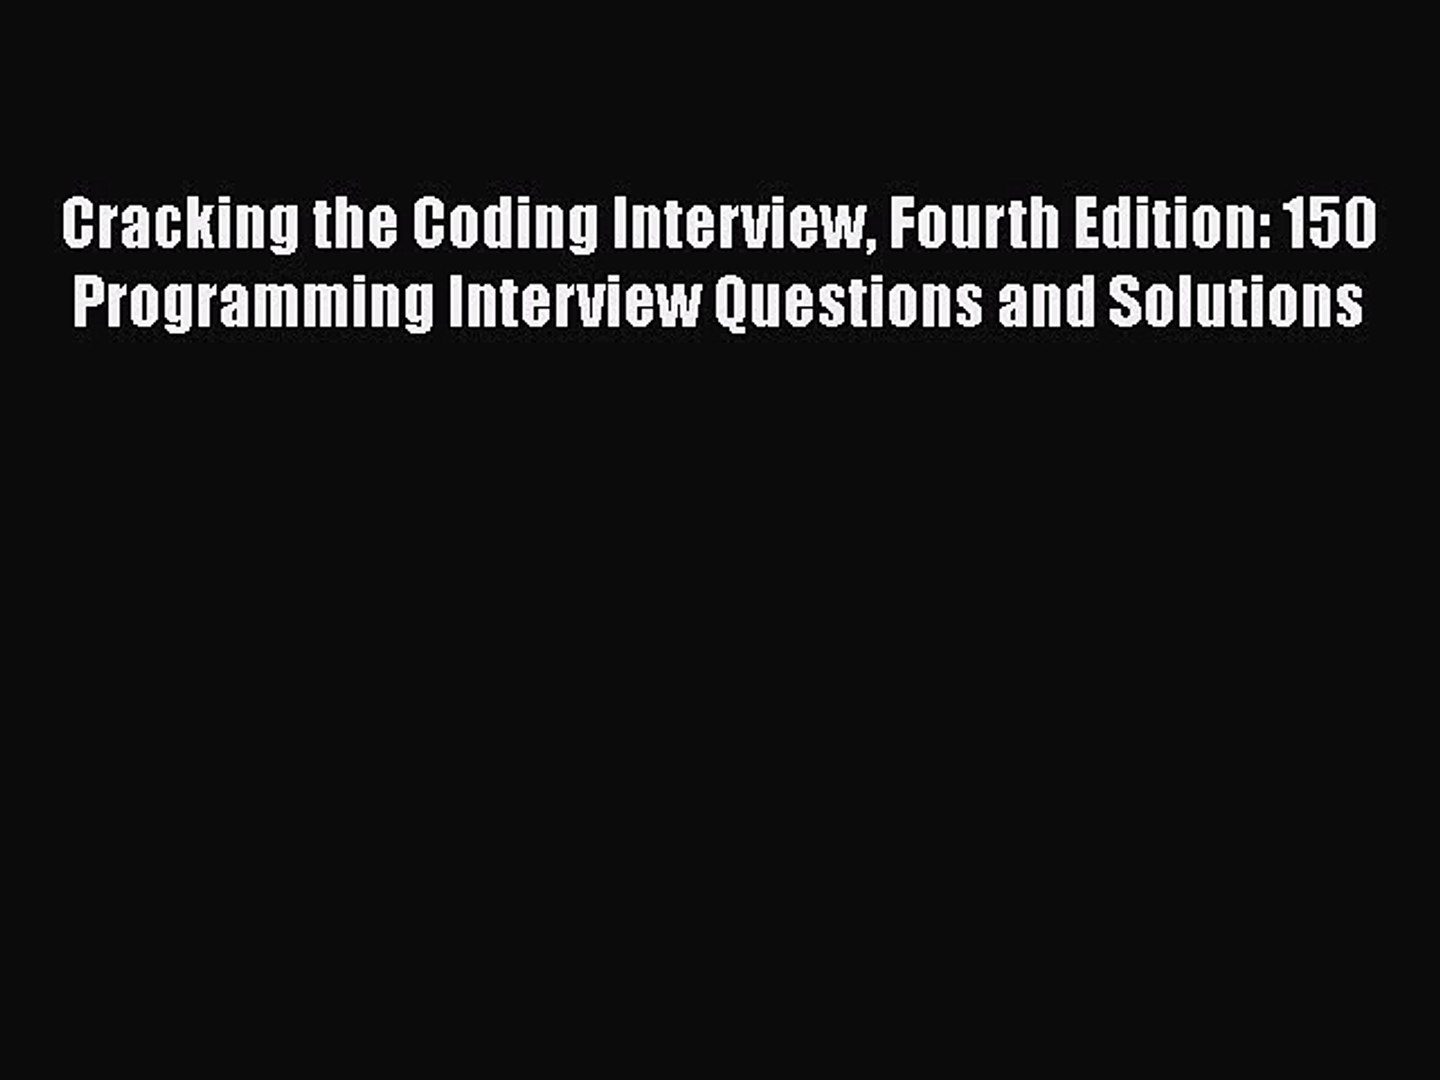 [Read book] Cracking the Coding Interview Fourth Edition: 150 Programming Interview Questions